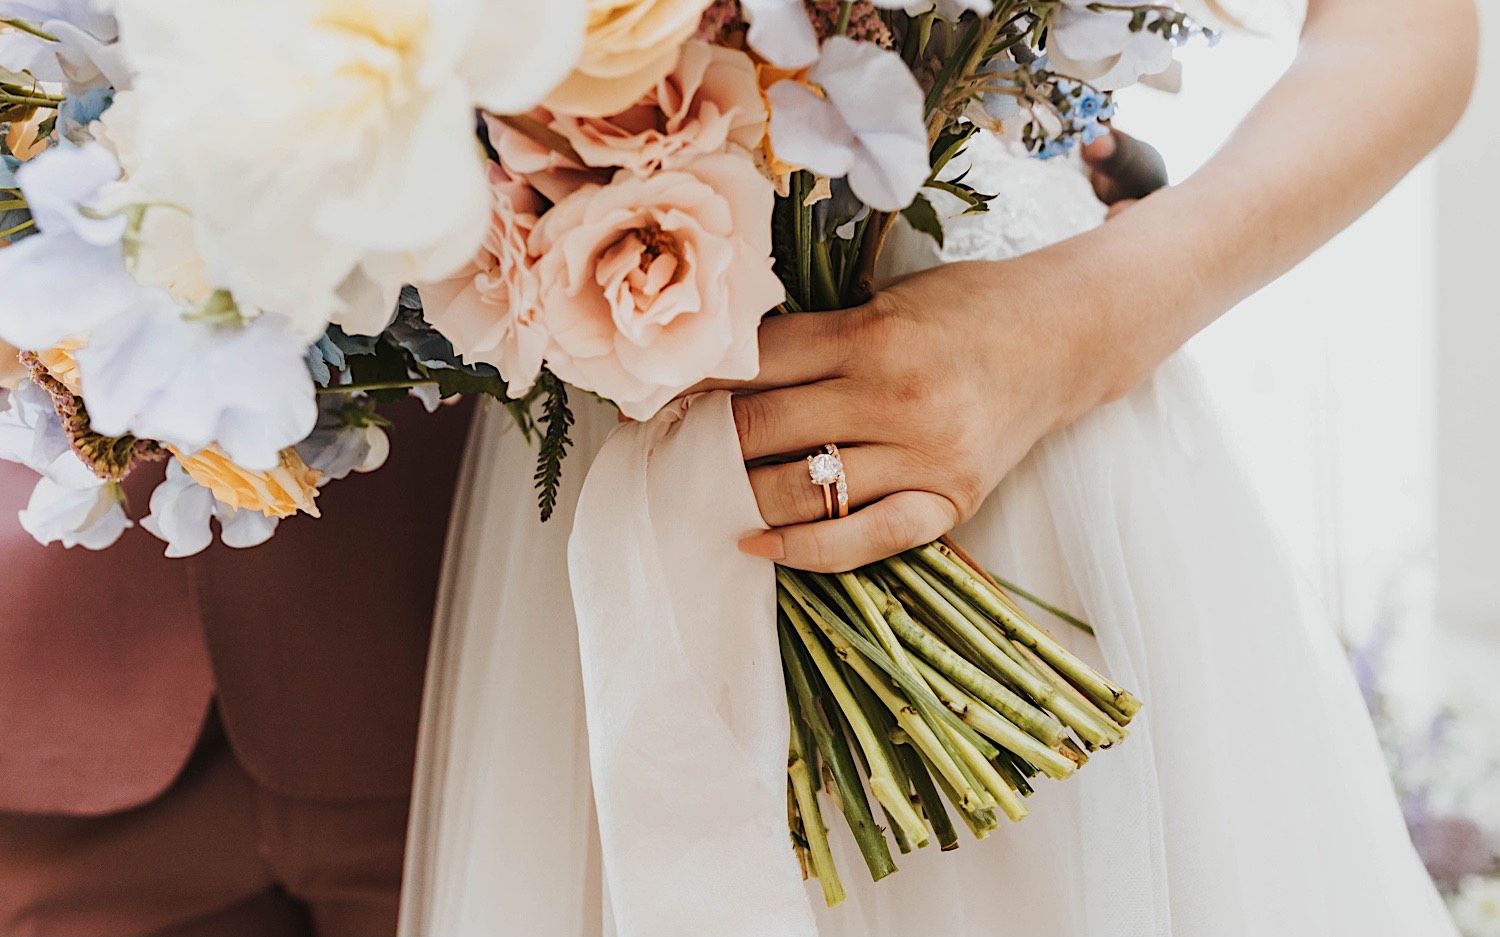 Close up photo of a bride's hand with her wedding ring on it holding her flower bouquet